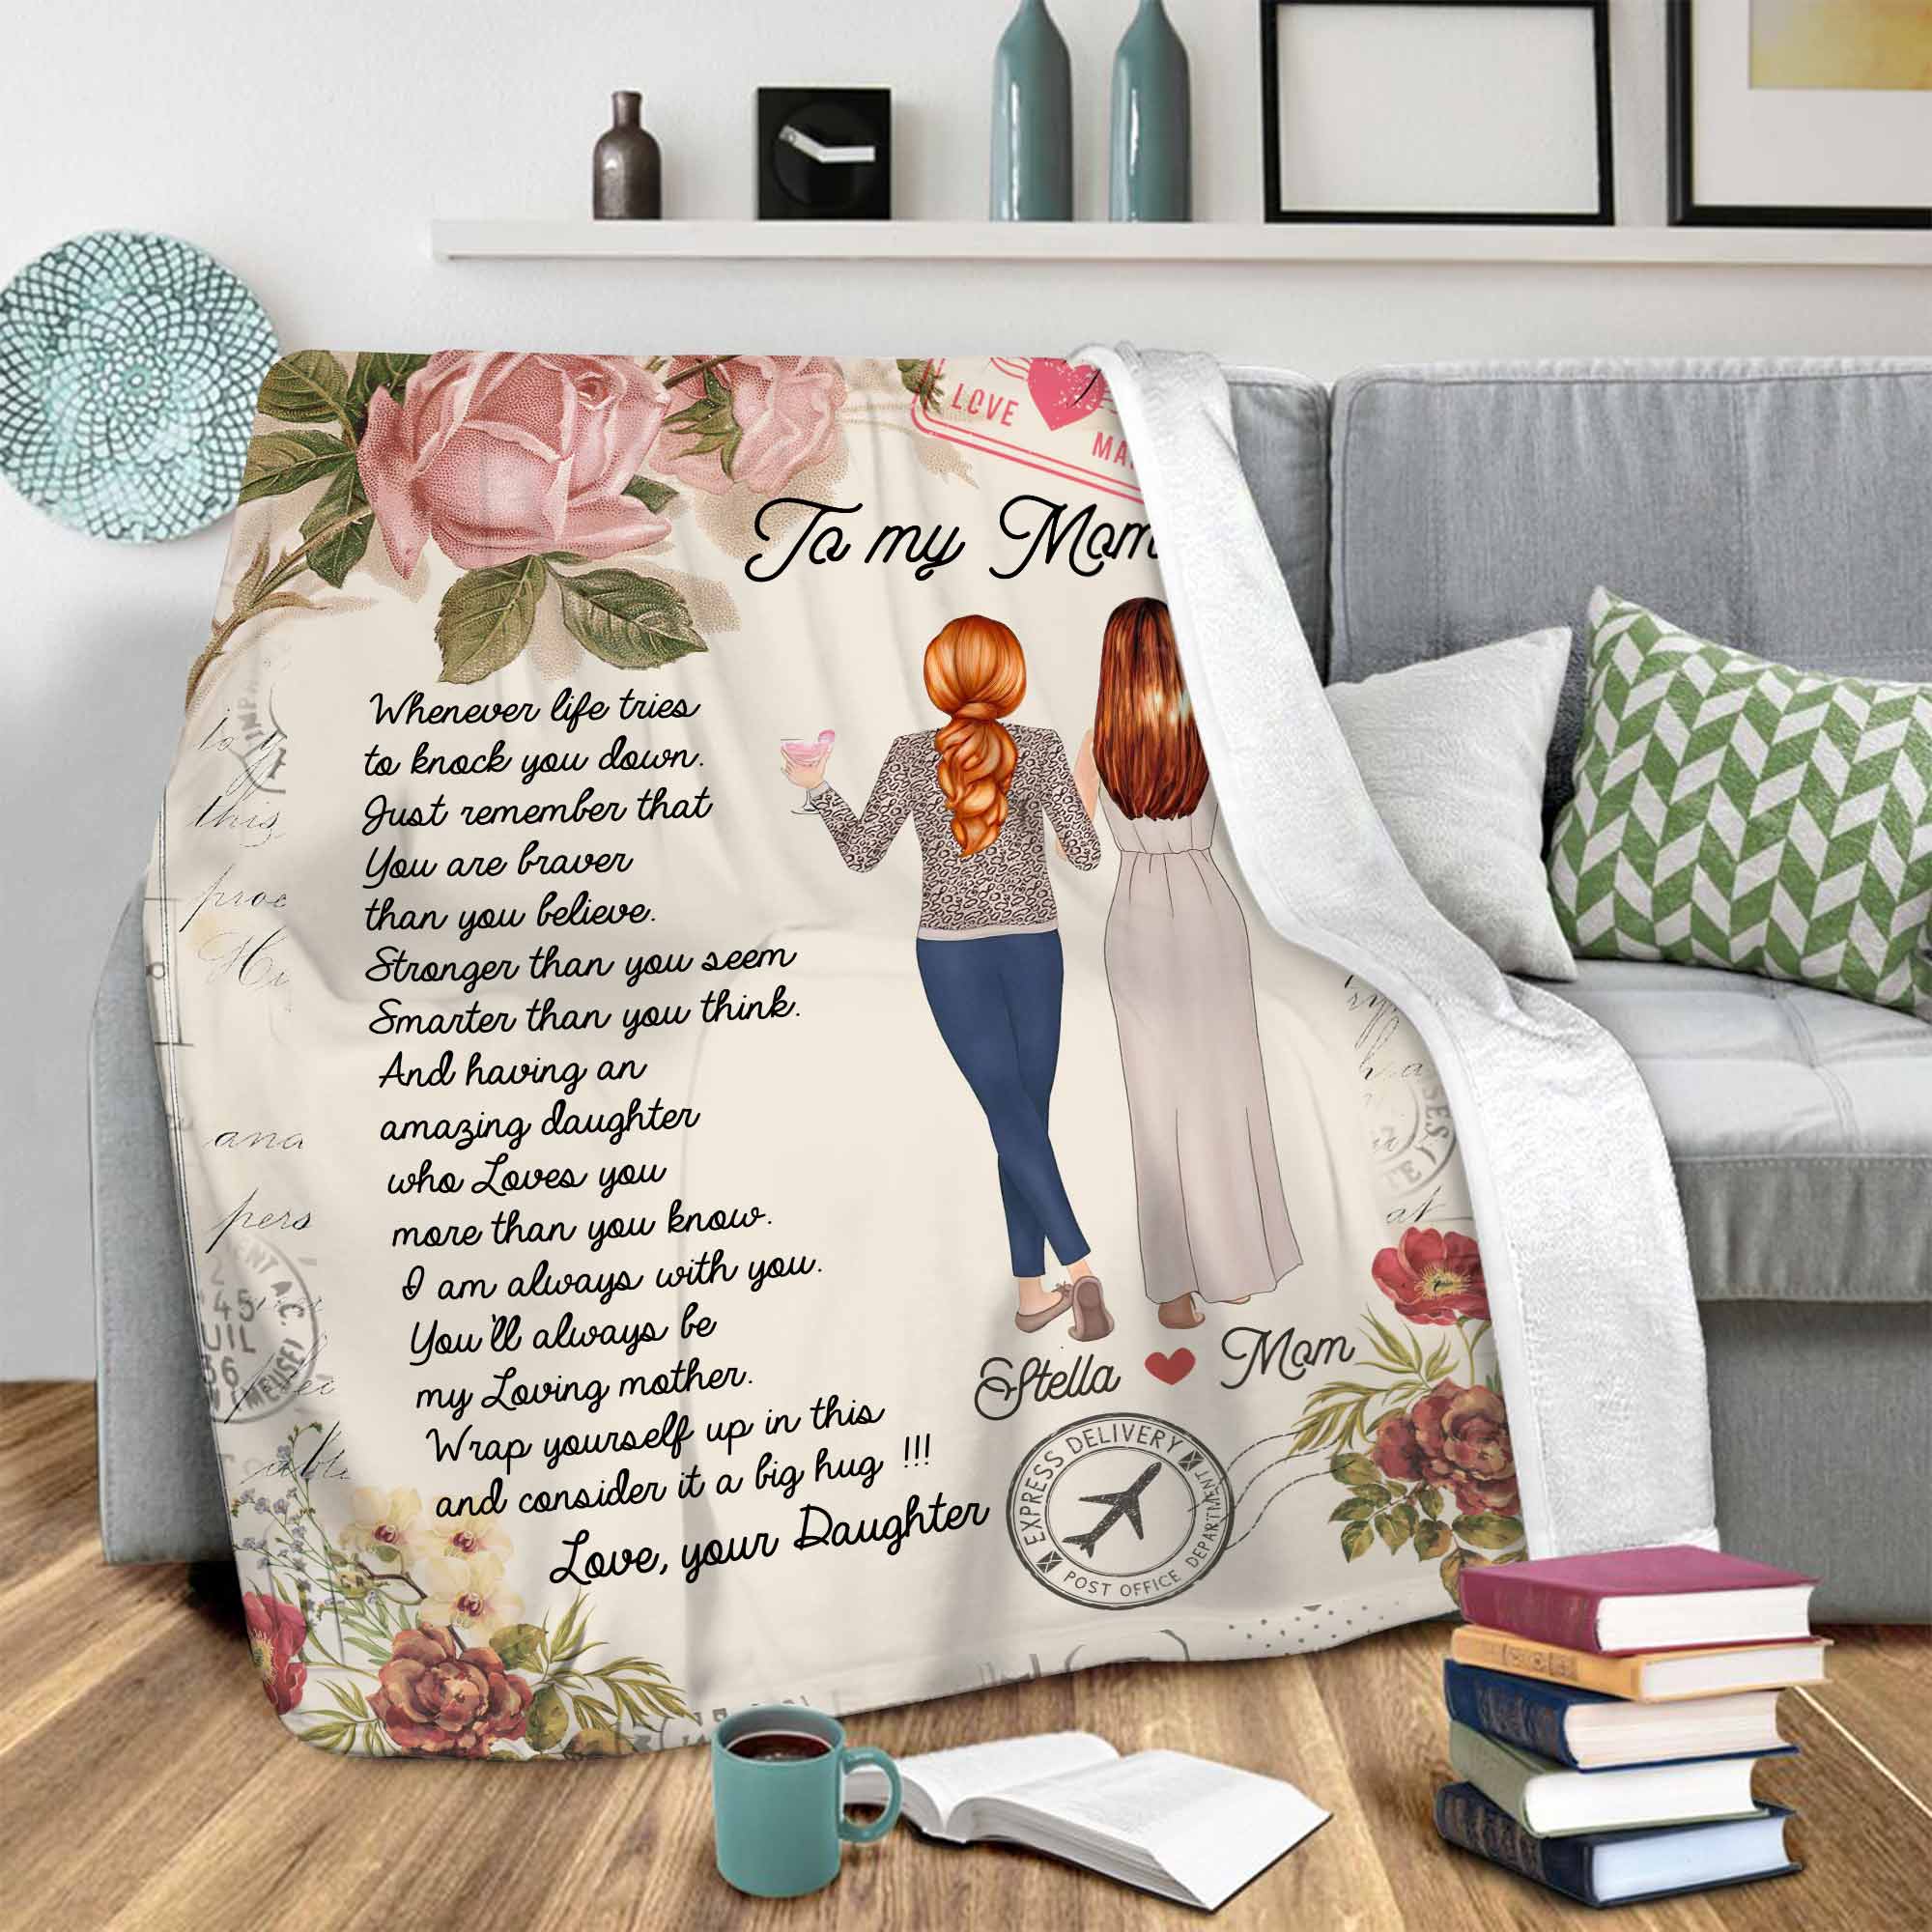 Mothers Day Gift Ideas For Mom From Daughter, Mother Birthday Gift From Daughter, Daughter to Mother Gifts